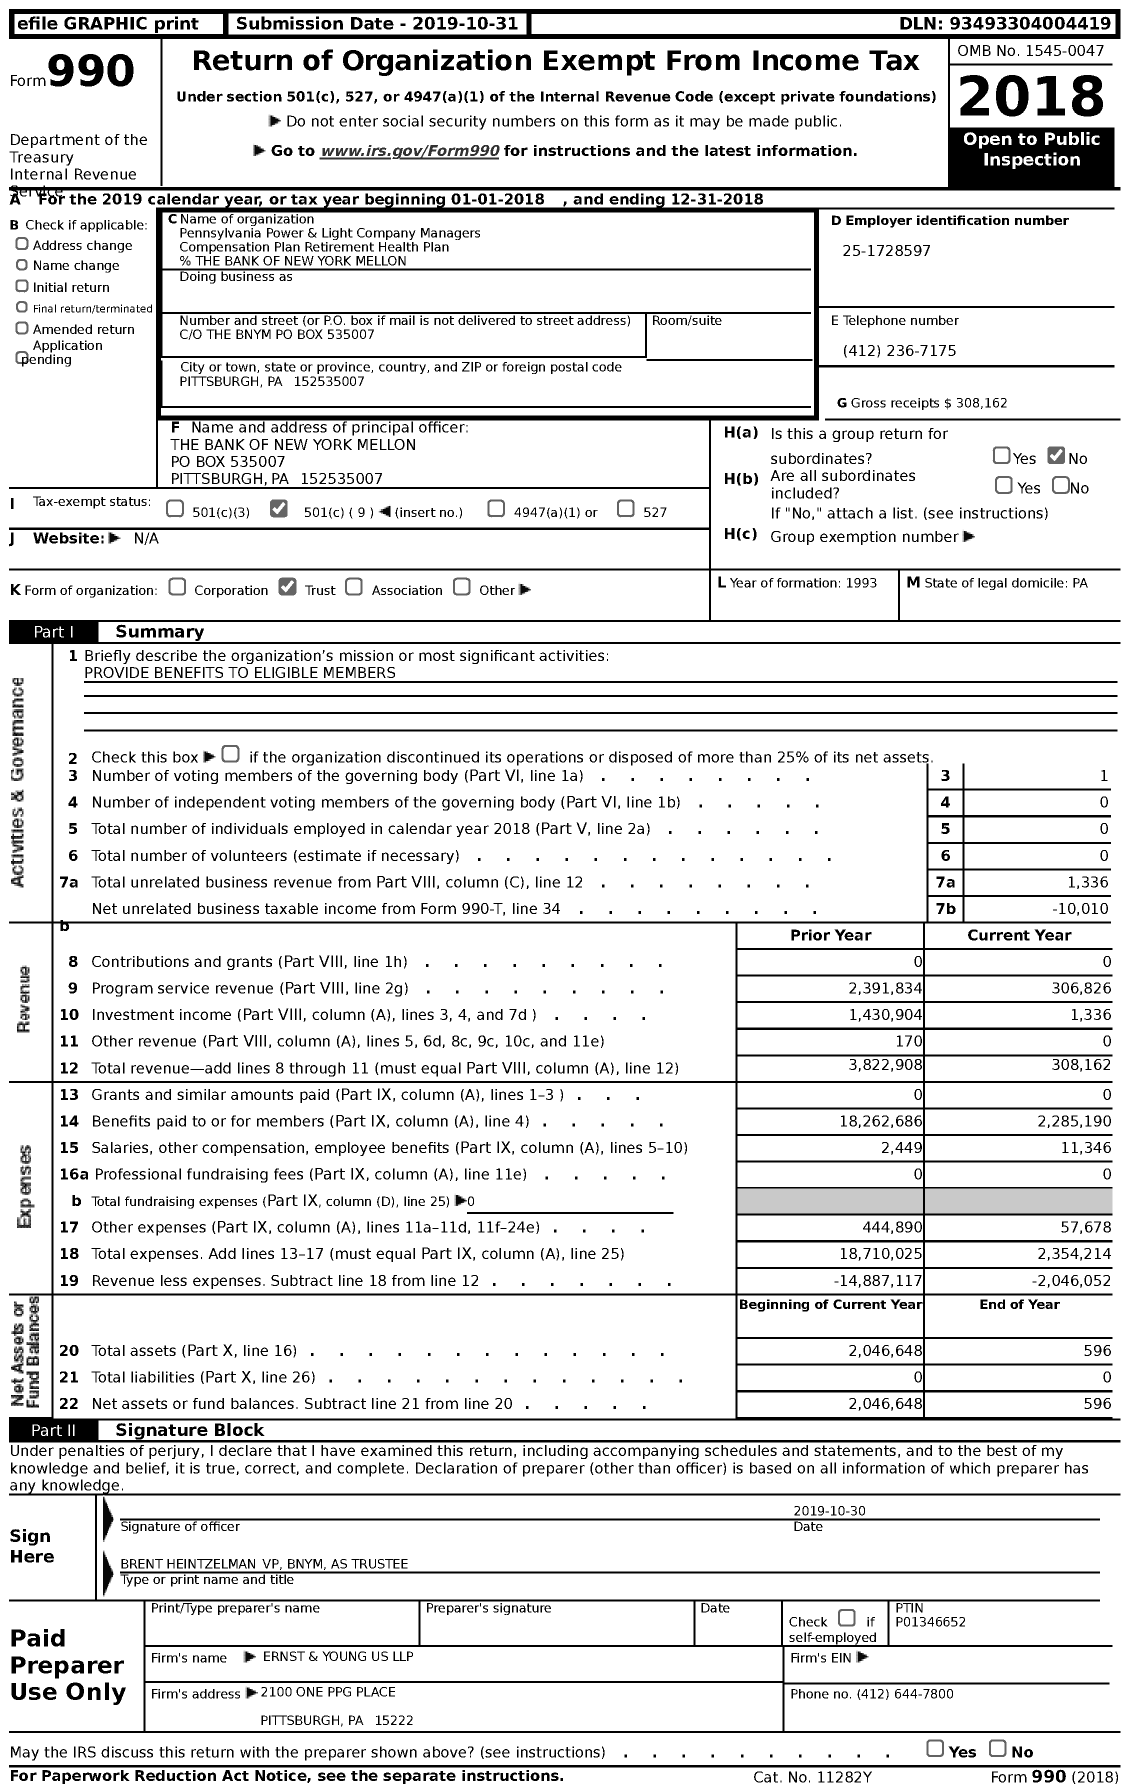 Image of first page of 2018 Form 990 for Pennsylvania Power and Light Company Managers